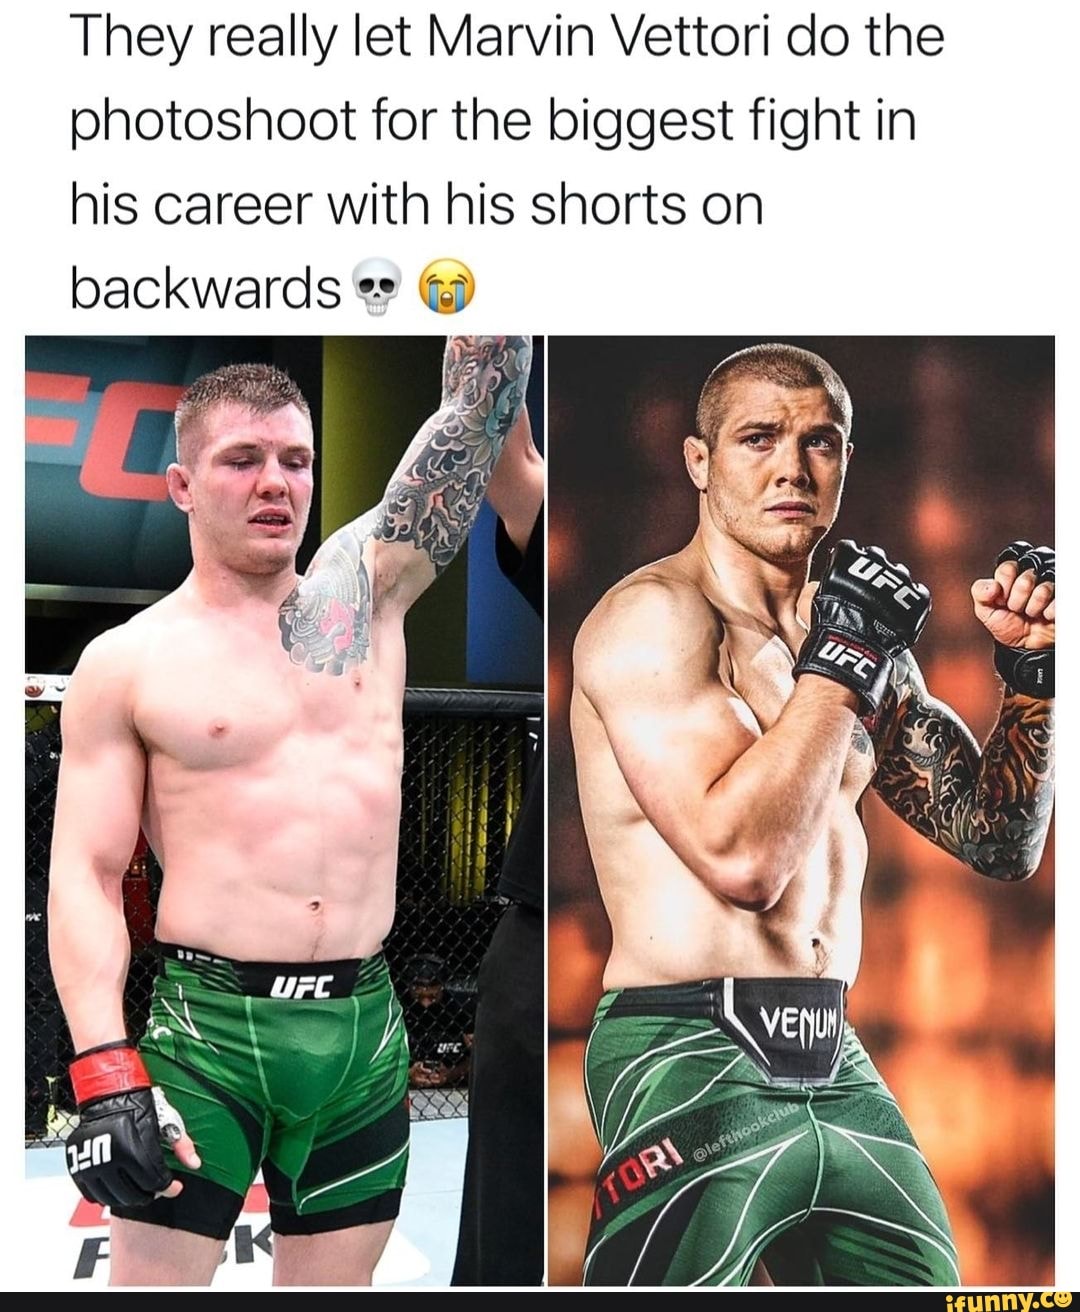 They really let Marvin Vettori do the photoshoot for the biggest fight in his career with his shorts on backwards